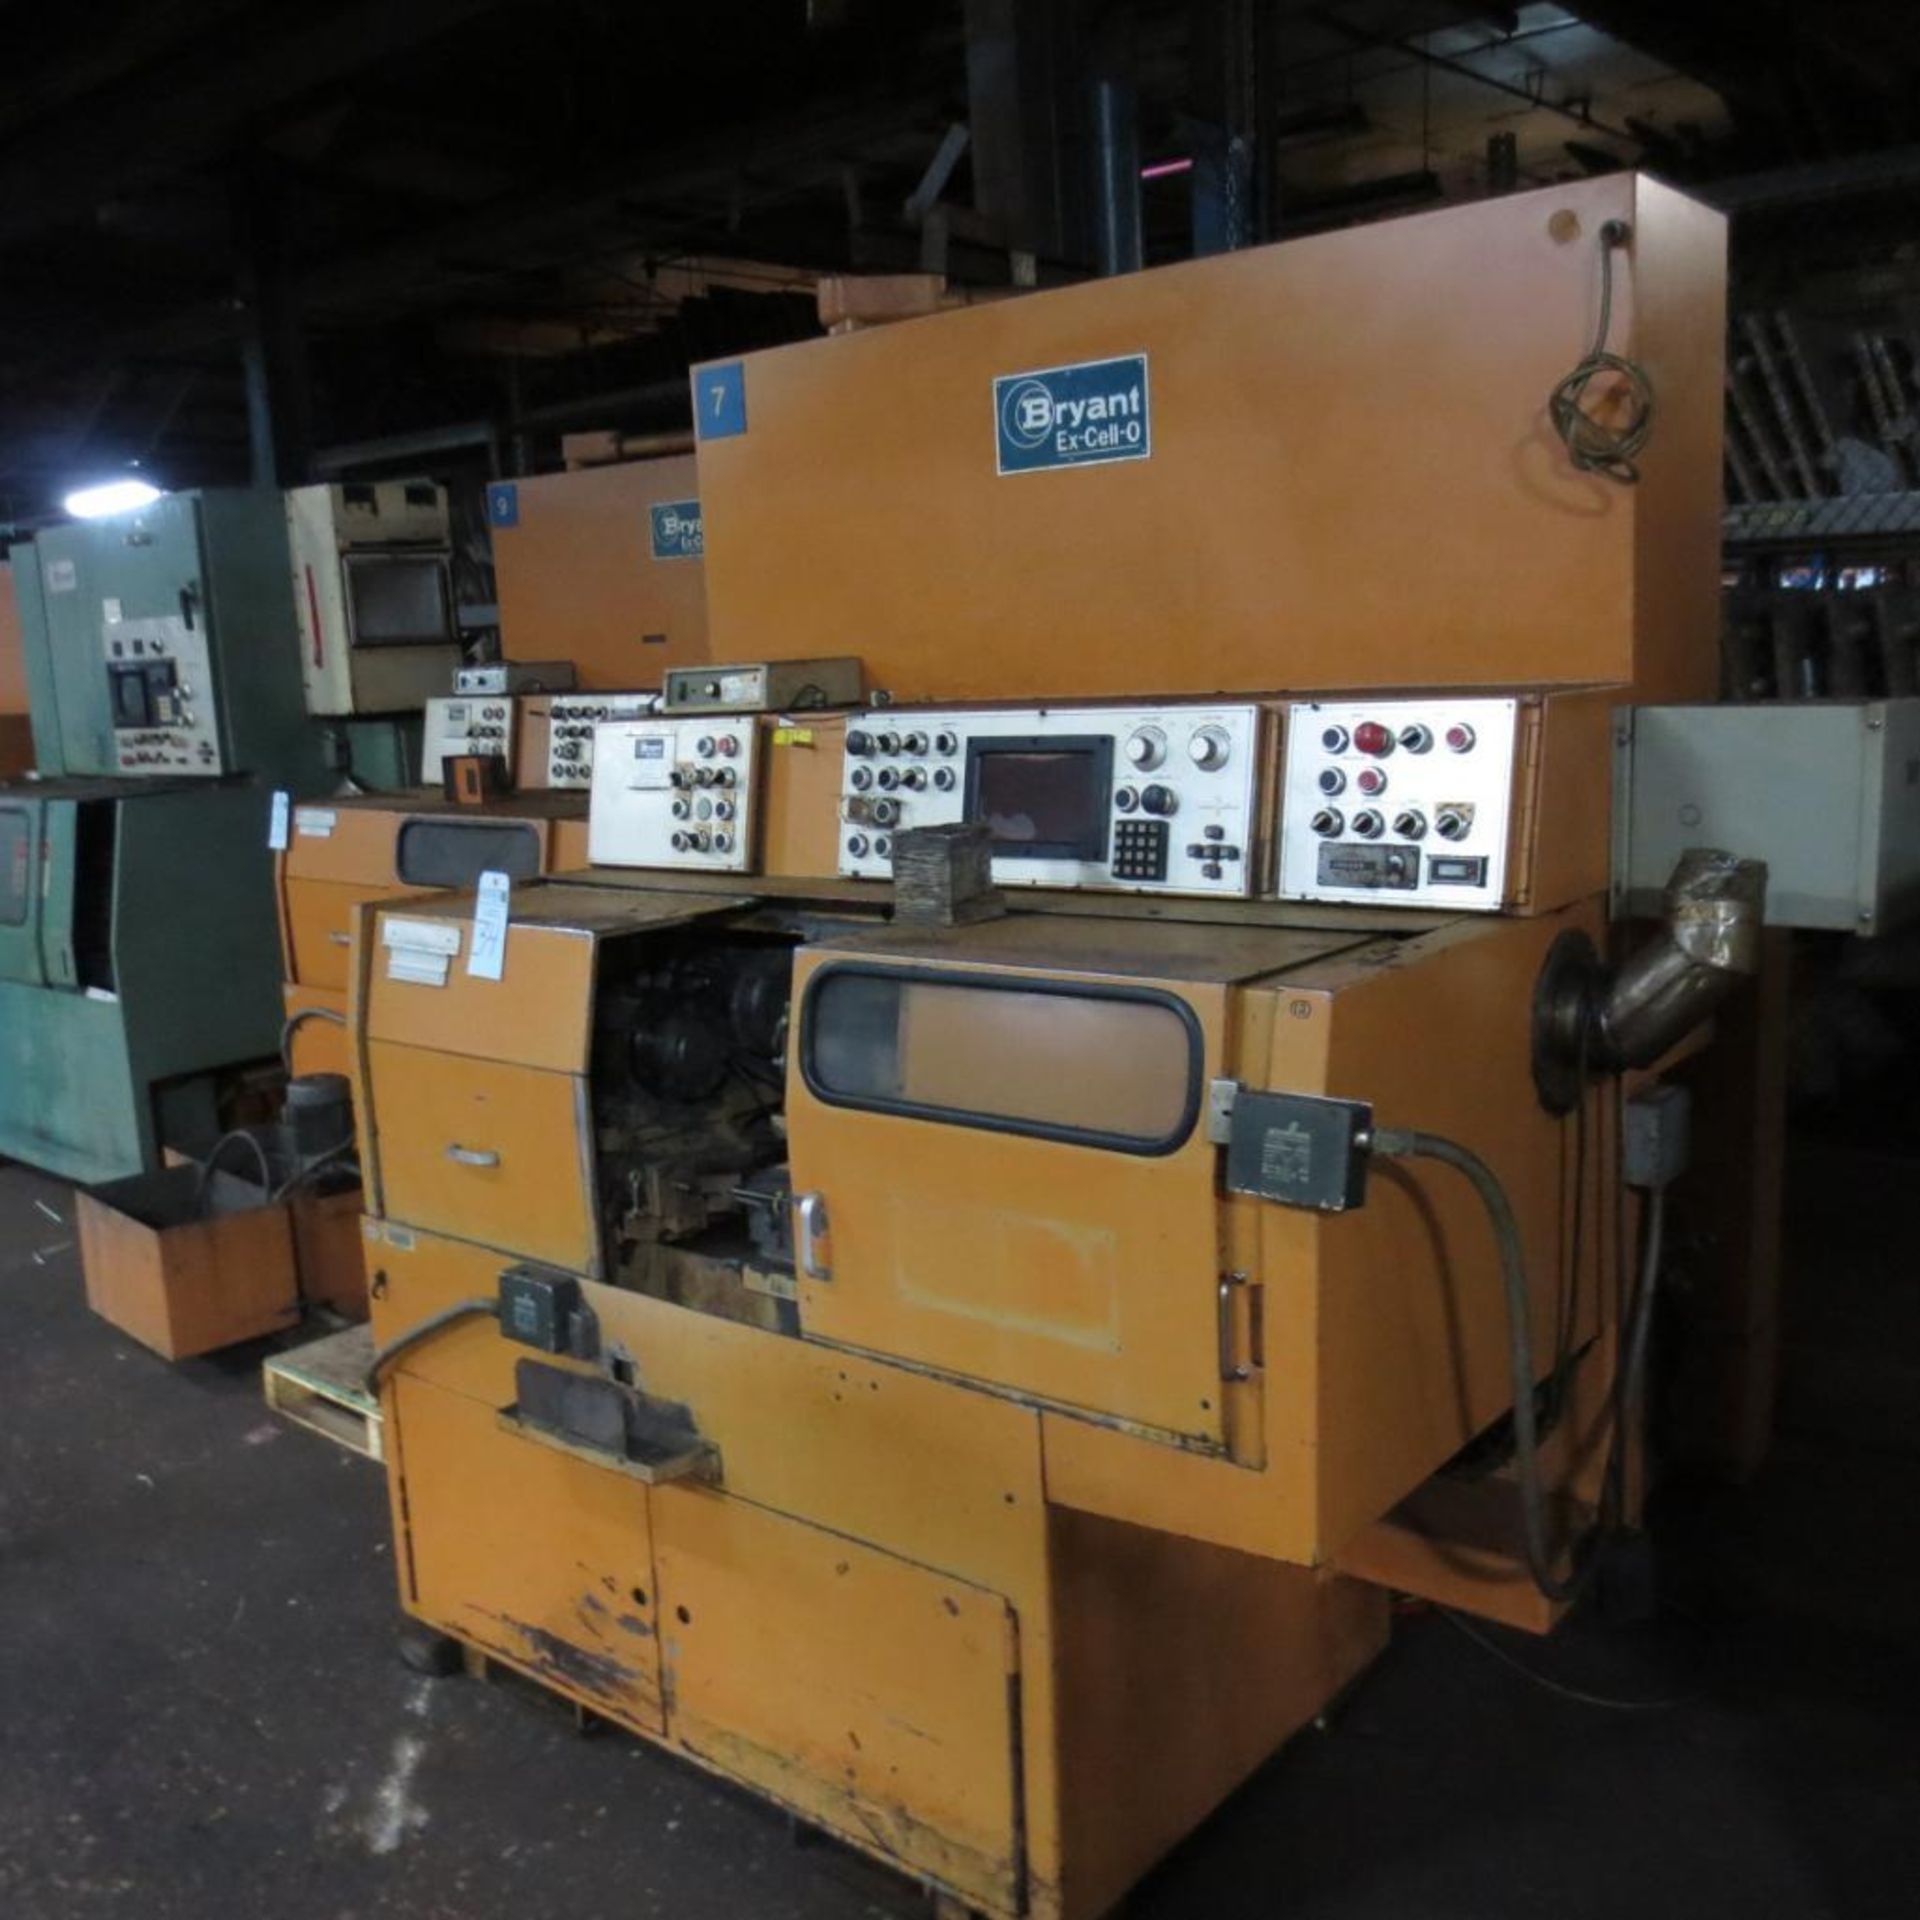 Bryant EX-Cell-0 LL1-10 CNC Grinder, S/N W-16893. Loading Fee is $350.00